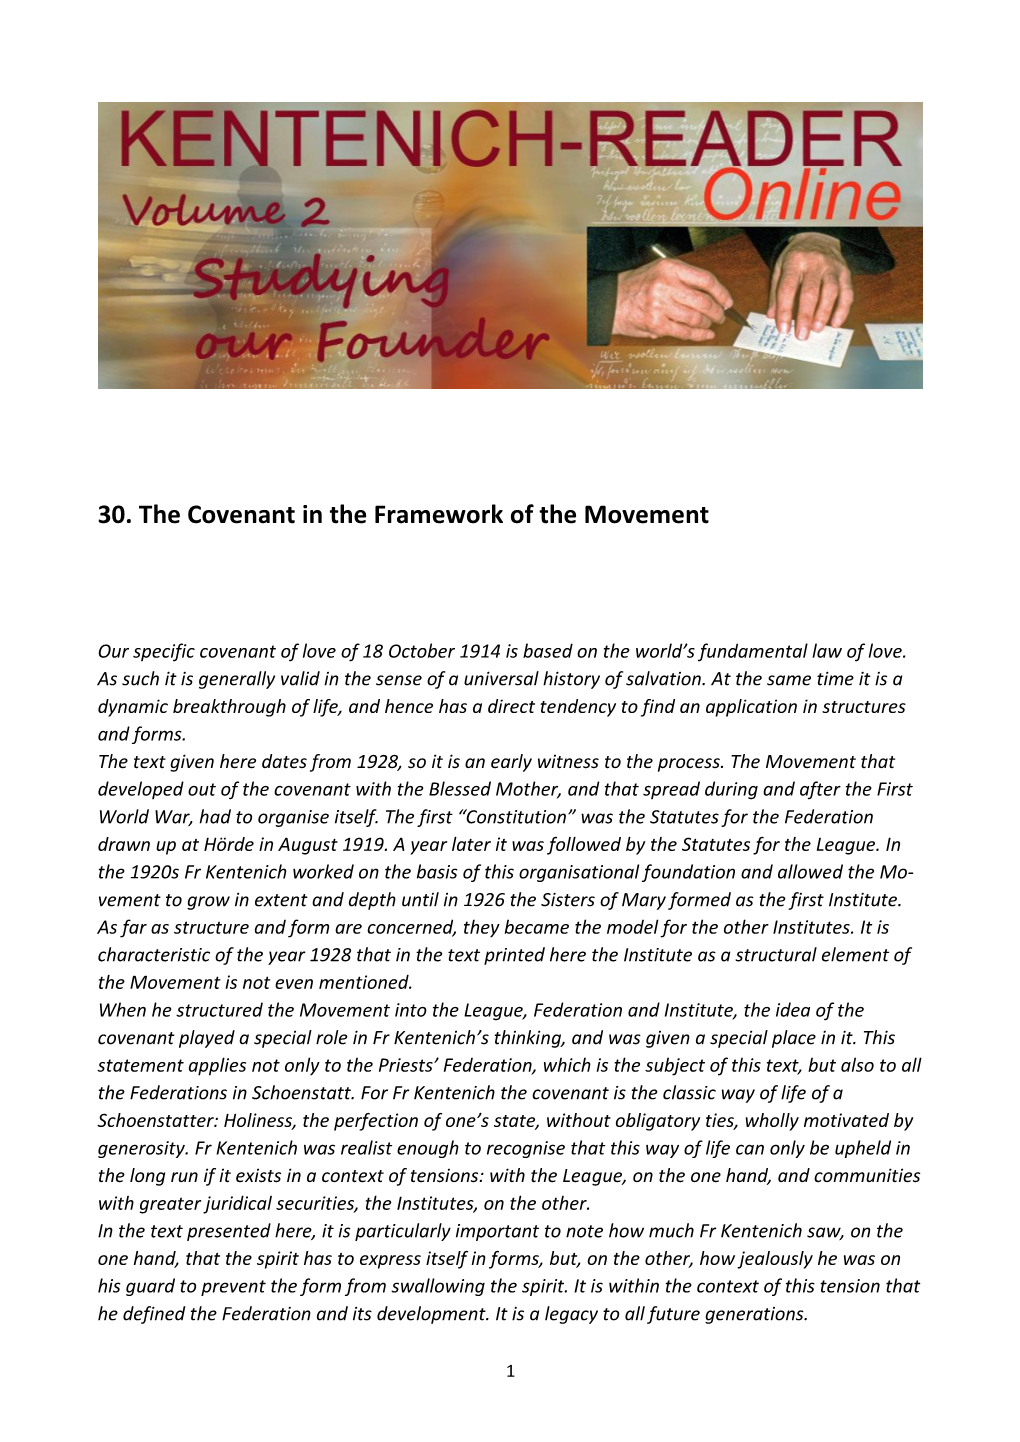 30. the Covenant in the Framework of the Movement